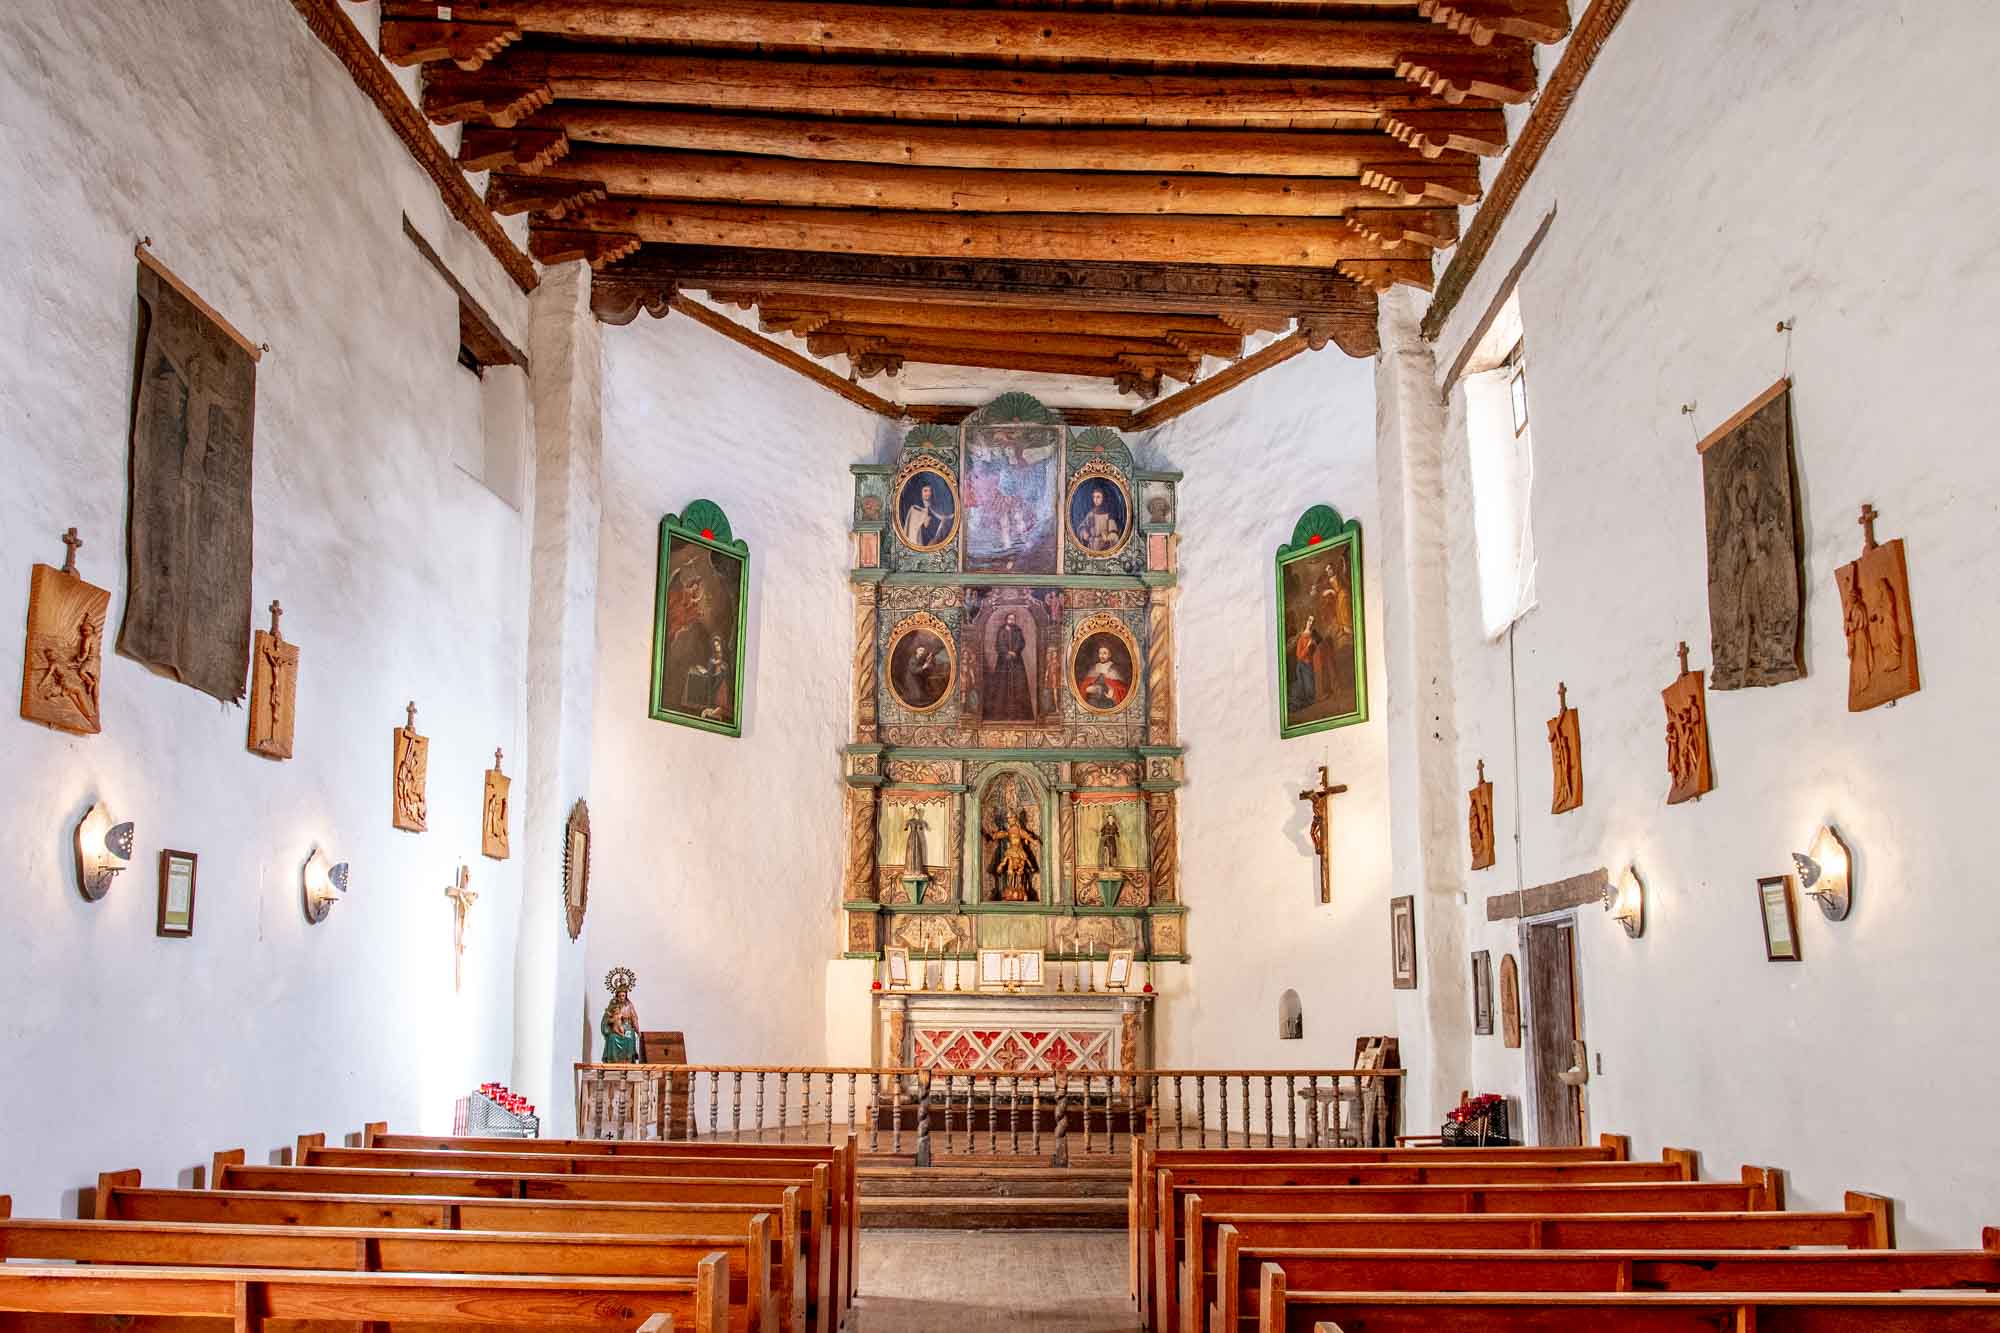 Chapel with pews, white walls, and a painted screen at the altar with multiple images of saints